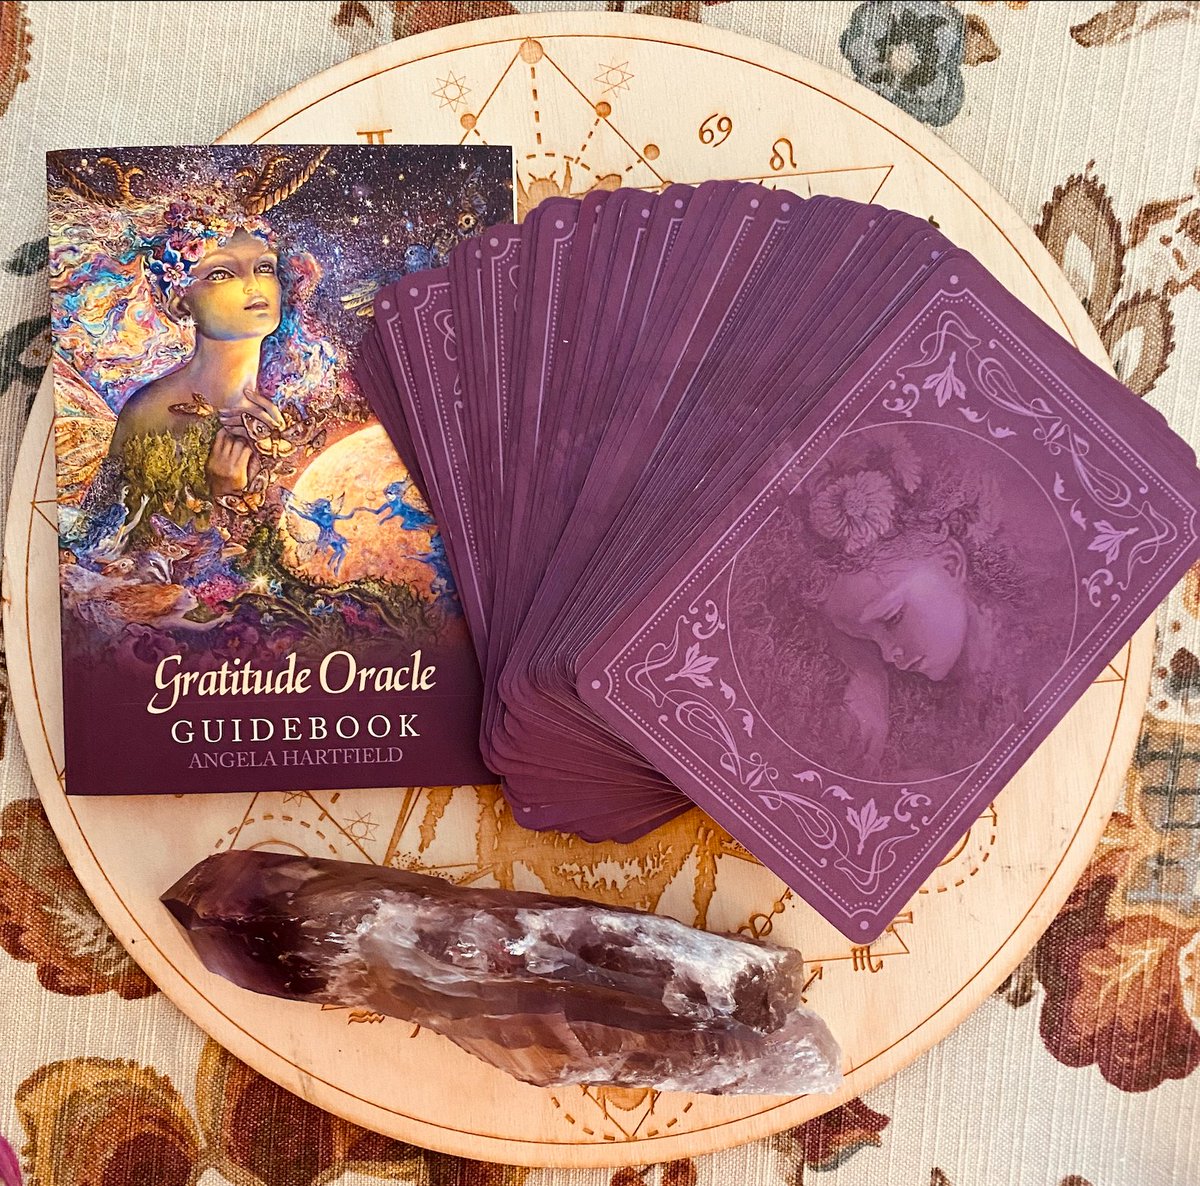 Gratitude overflows as the weekend winds down.

Closing it out with an offering. Holler back for an individual card pull from the Gratitude deck for reminders of life's goodness, & thoughts to ponder as you walk forward. DMs open.

gratuity:
venmo ReikiMN
paypal.me/reikimn